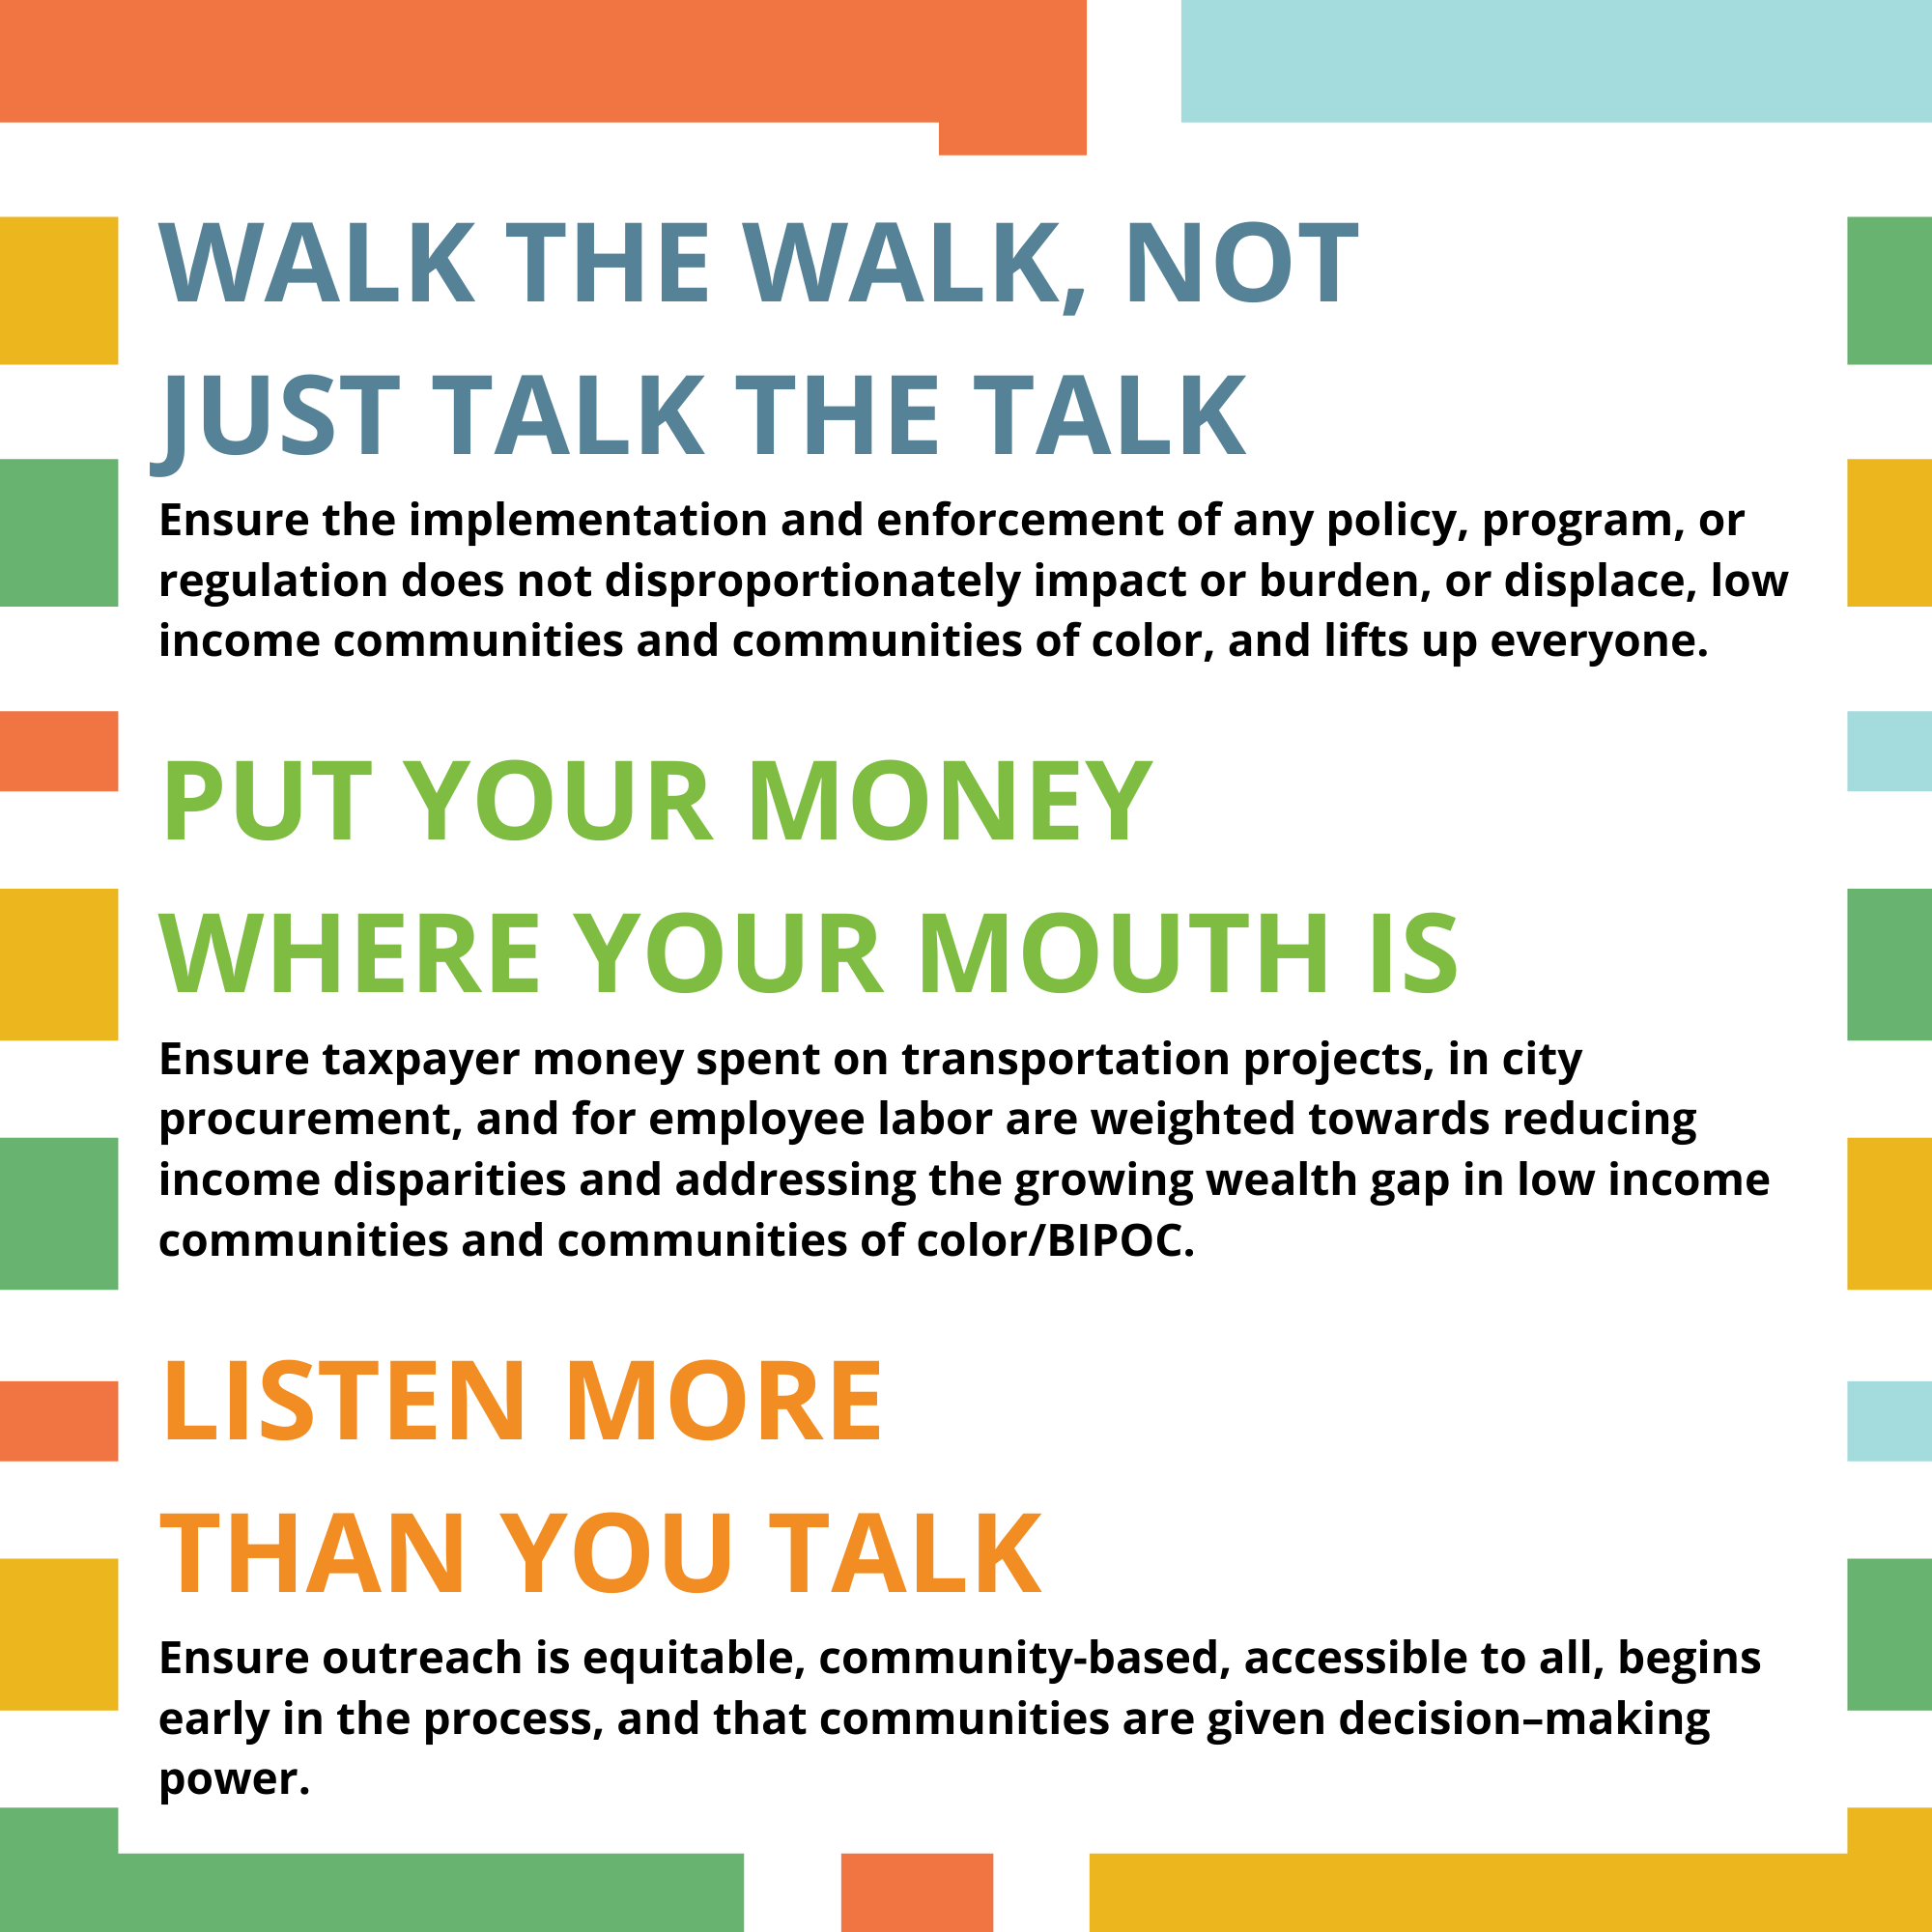 This graphic includes the Guiding Principle Text: (1) Walk the walk, not just talk the talk; ensure the implementation and enforcement of any policy, program, or regulation does not disproportionately impact or burden, or displace, low income communities and communities of color, and lifts up everyone. (2) Put your money where your mouth is: ensure taxpayer money spent on transportation projects, in city procurement, and for employee labor are weighted towards reducing income disparities and addressing the growing wealth gap in low income communities and communities of color/BIPOC. (3) Listen more than you talk: ensure outreach is equitable, community-based, accessible to all, begins early in the process, and that communities are given decision – making power. 